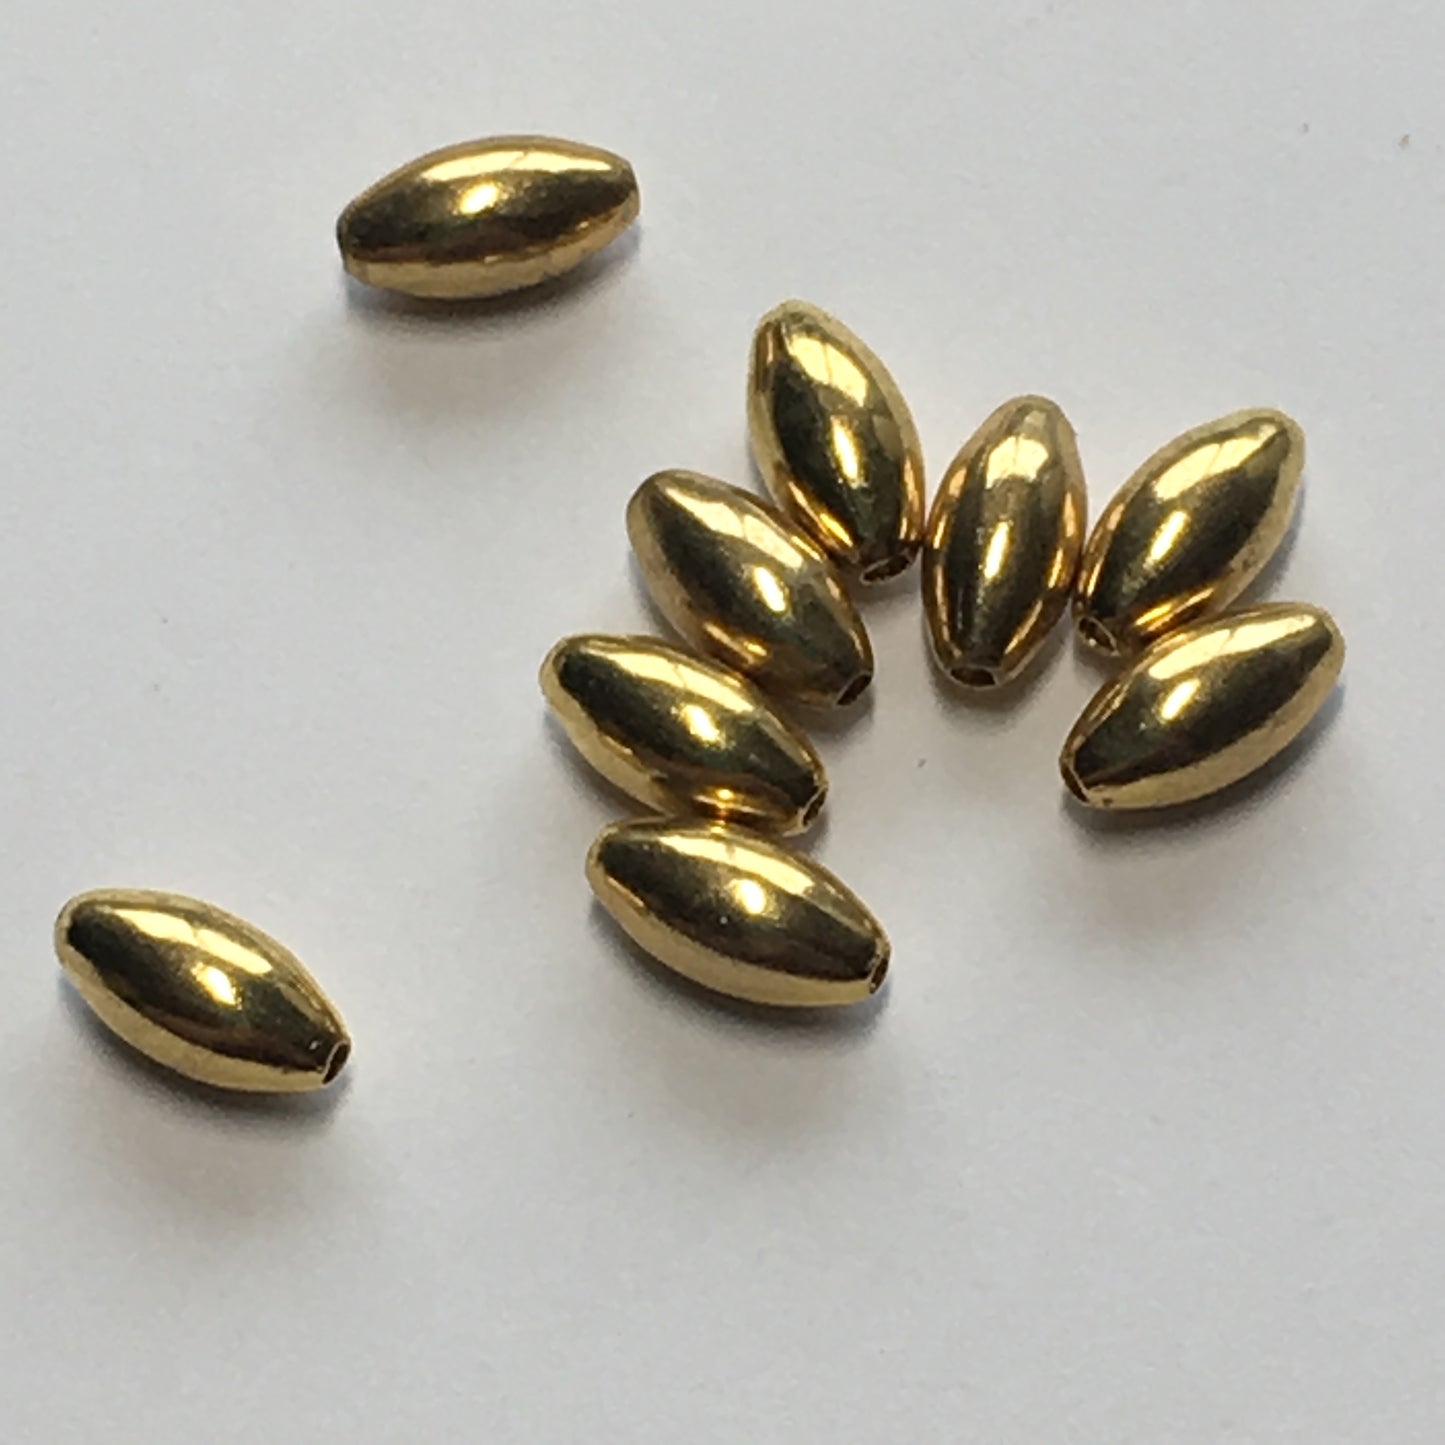 Gold Oval Beads, 8 x 4 mm - 9 Beads